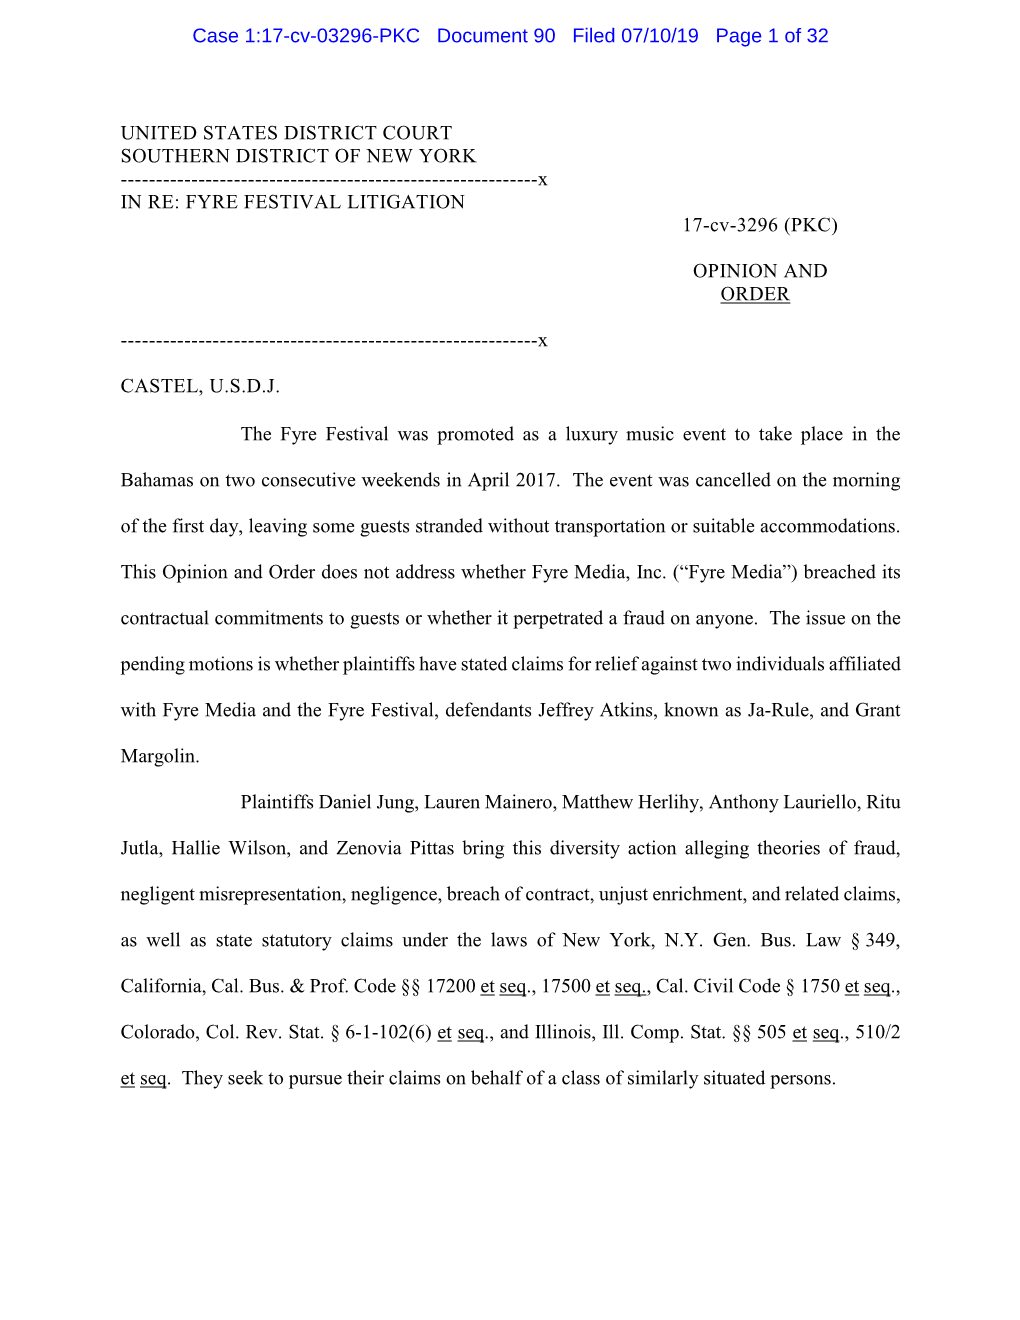 UNITED STATES DISTRICT COURT SOUTHERN DISTRICT of NEW YORK ------X in RE: FYRE FESTIVAL LITIGATION 17-Cv-3296 (PKC)